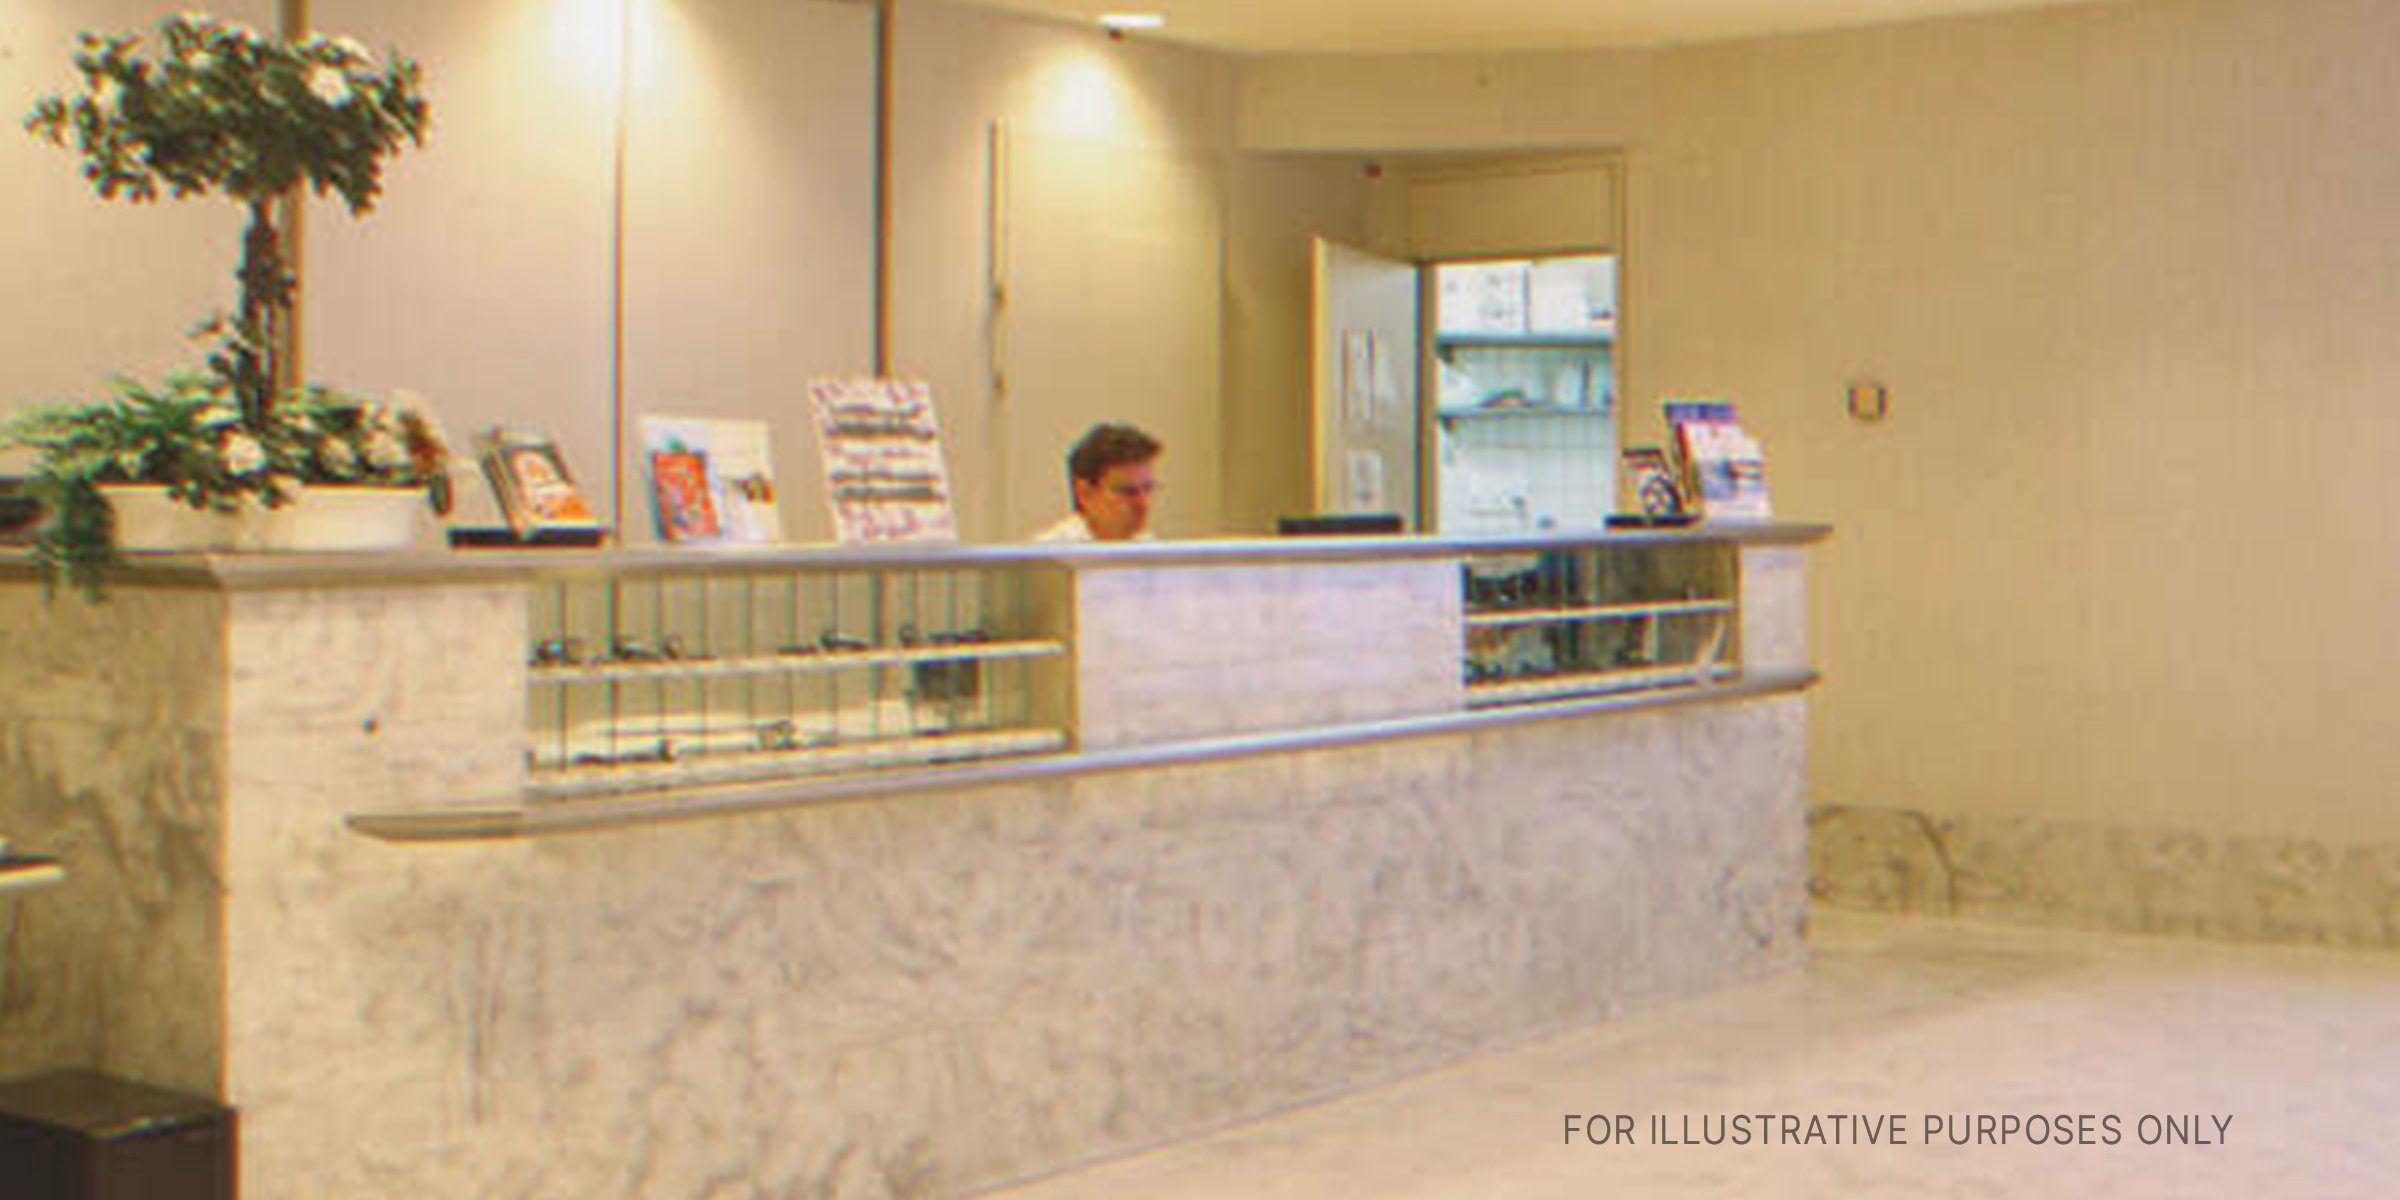 Hotel Manager Behind The Reception Desk. | Source: Flickr / fhotels (CC BY 2.0)